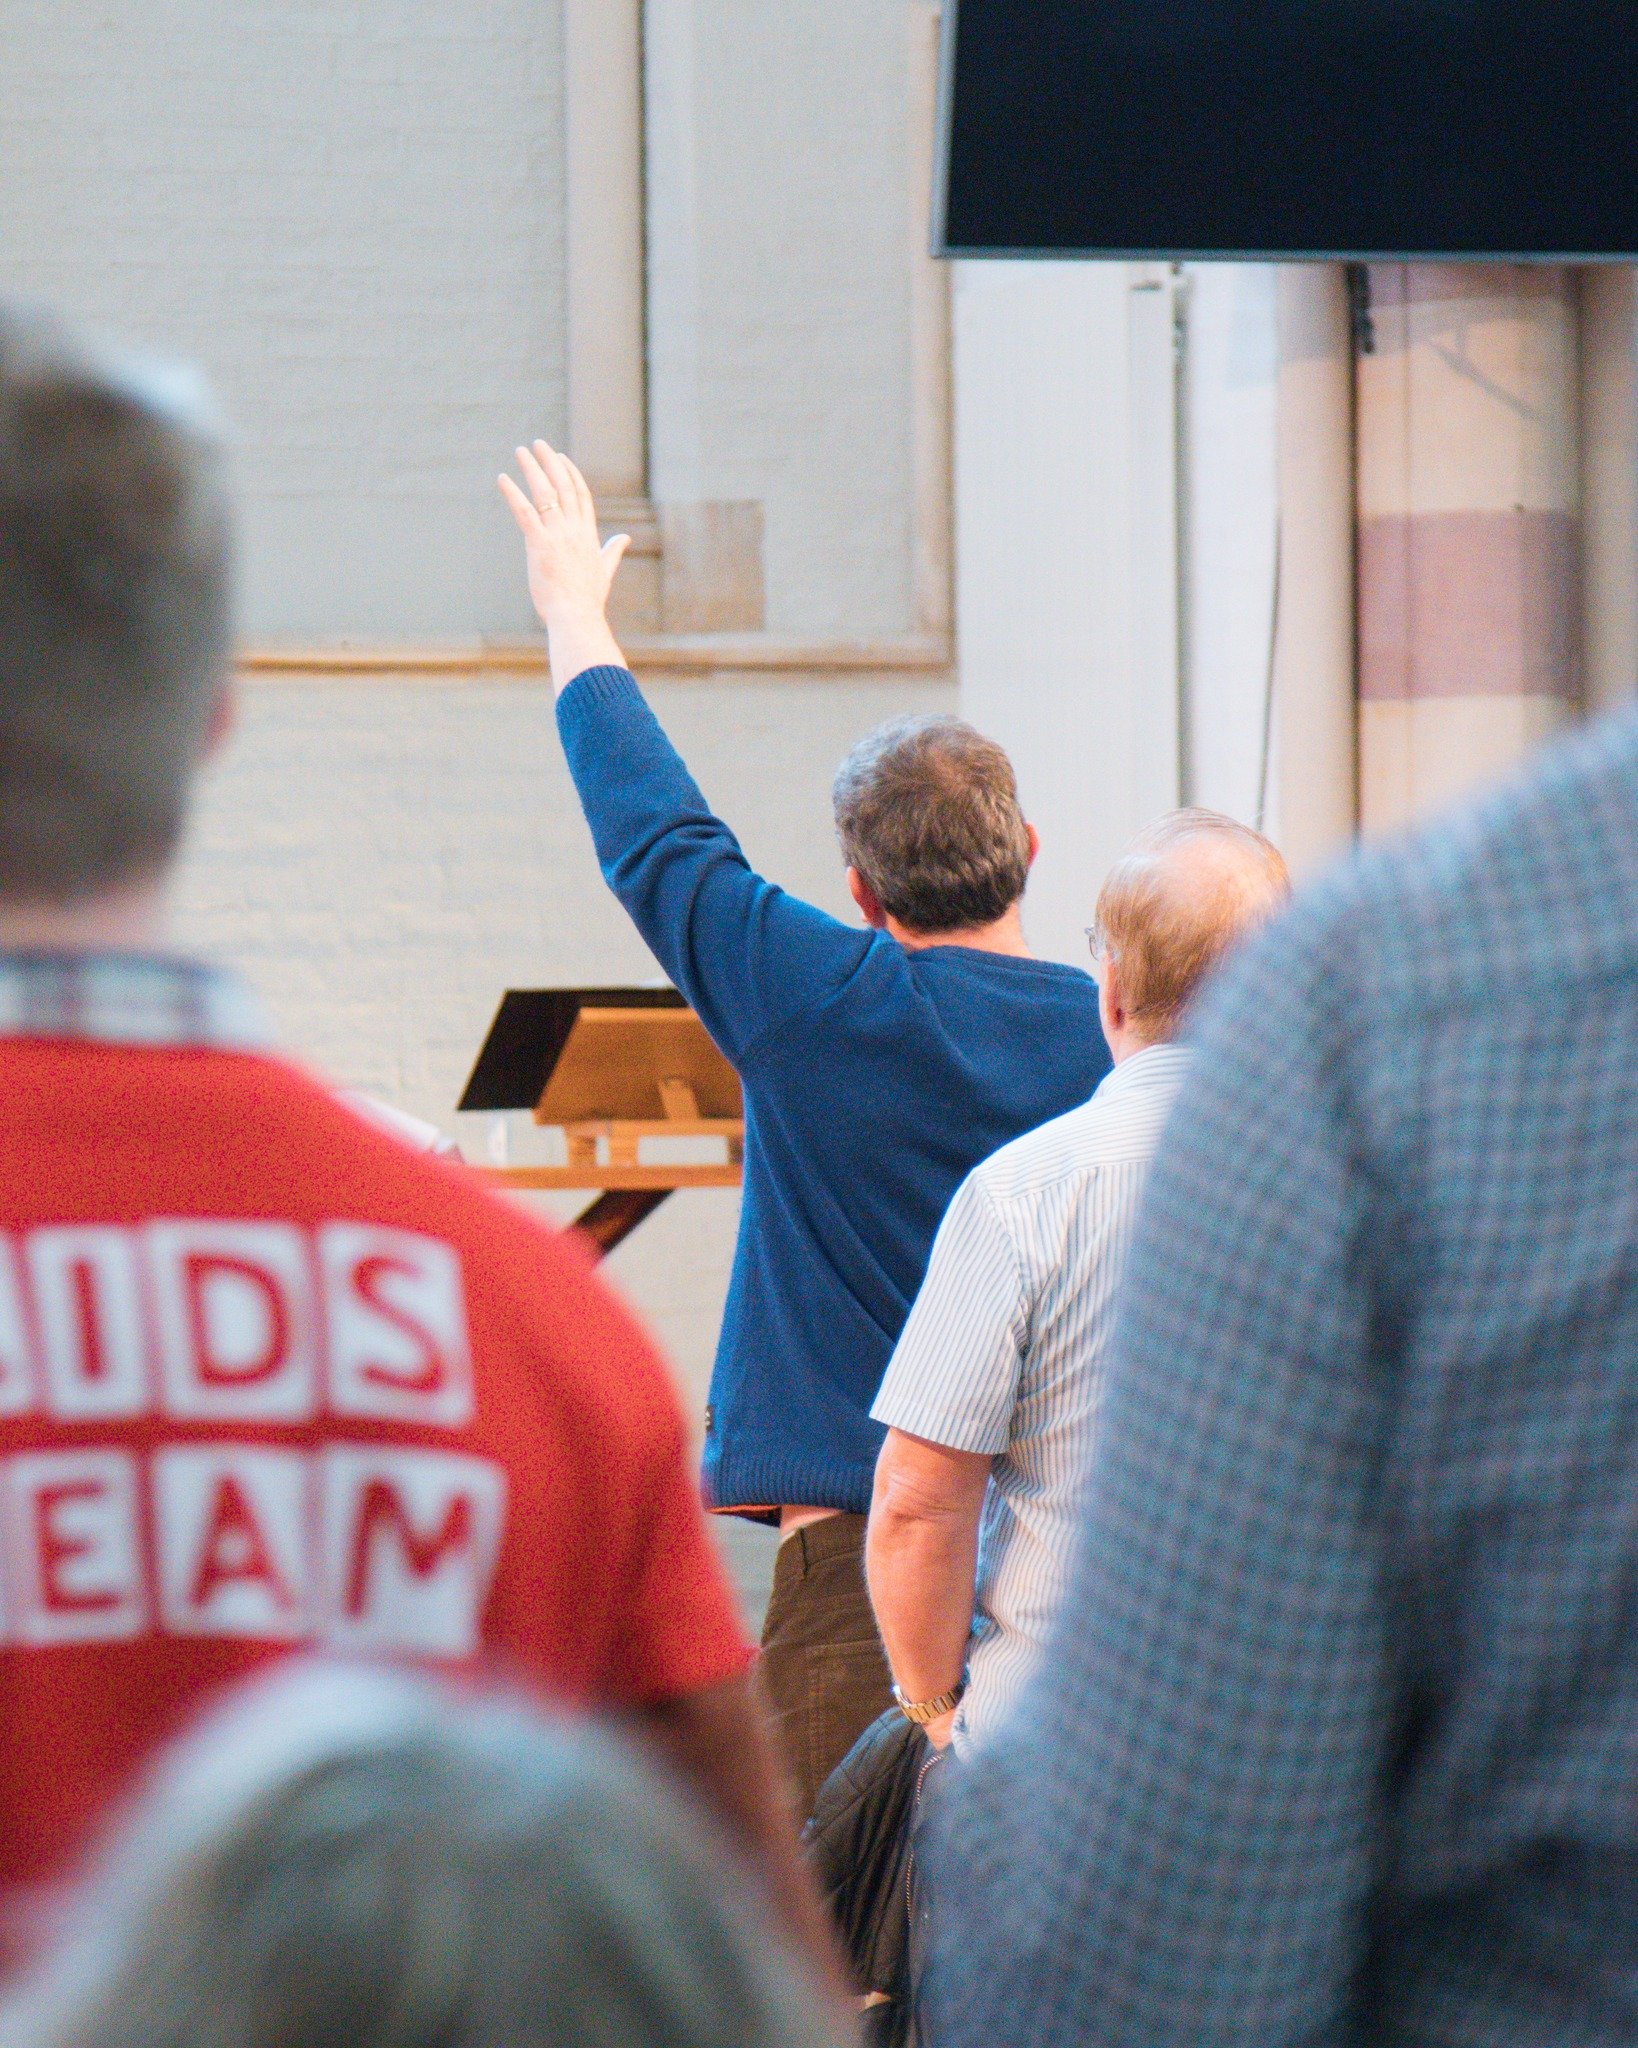 It was so good to have John Coles with us on Sunday for our @newwineengland Celebration! 🙌

Head to stbs.org/media to catch the talk if you missed it 🎧